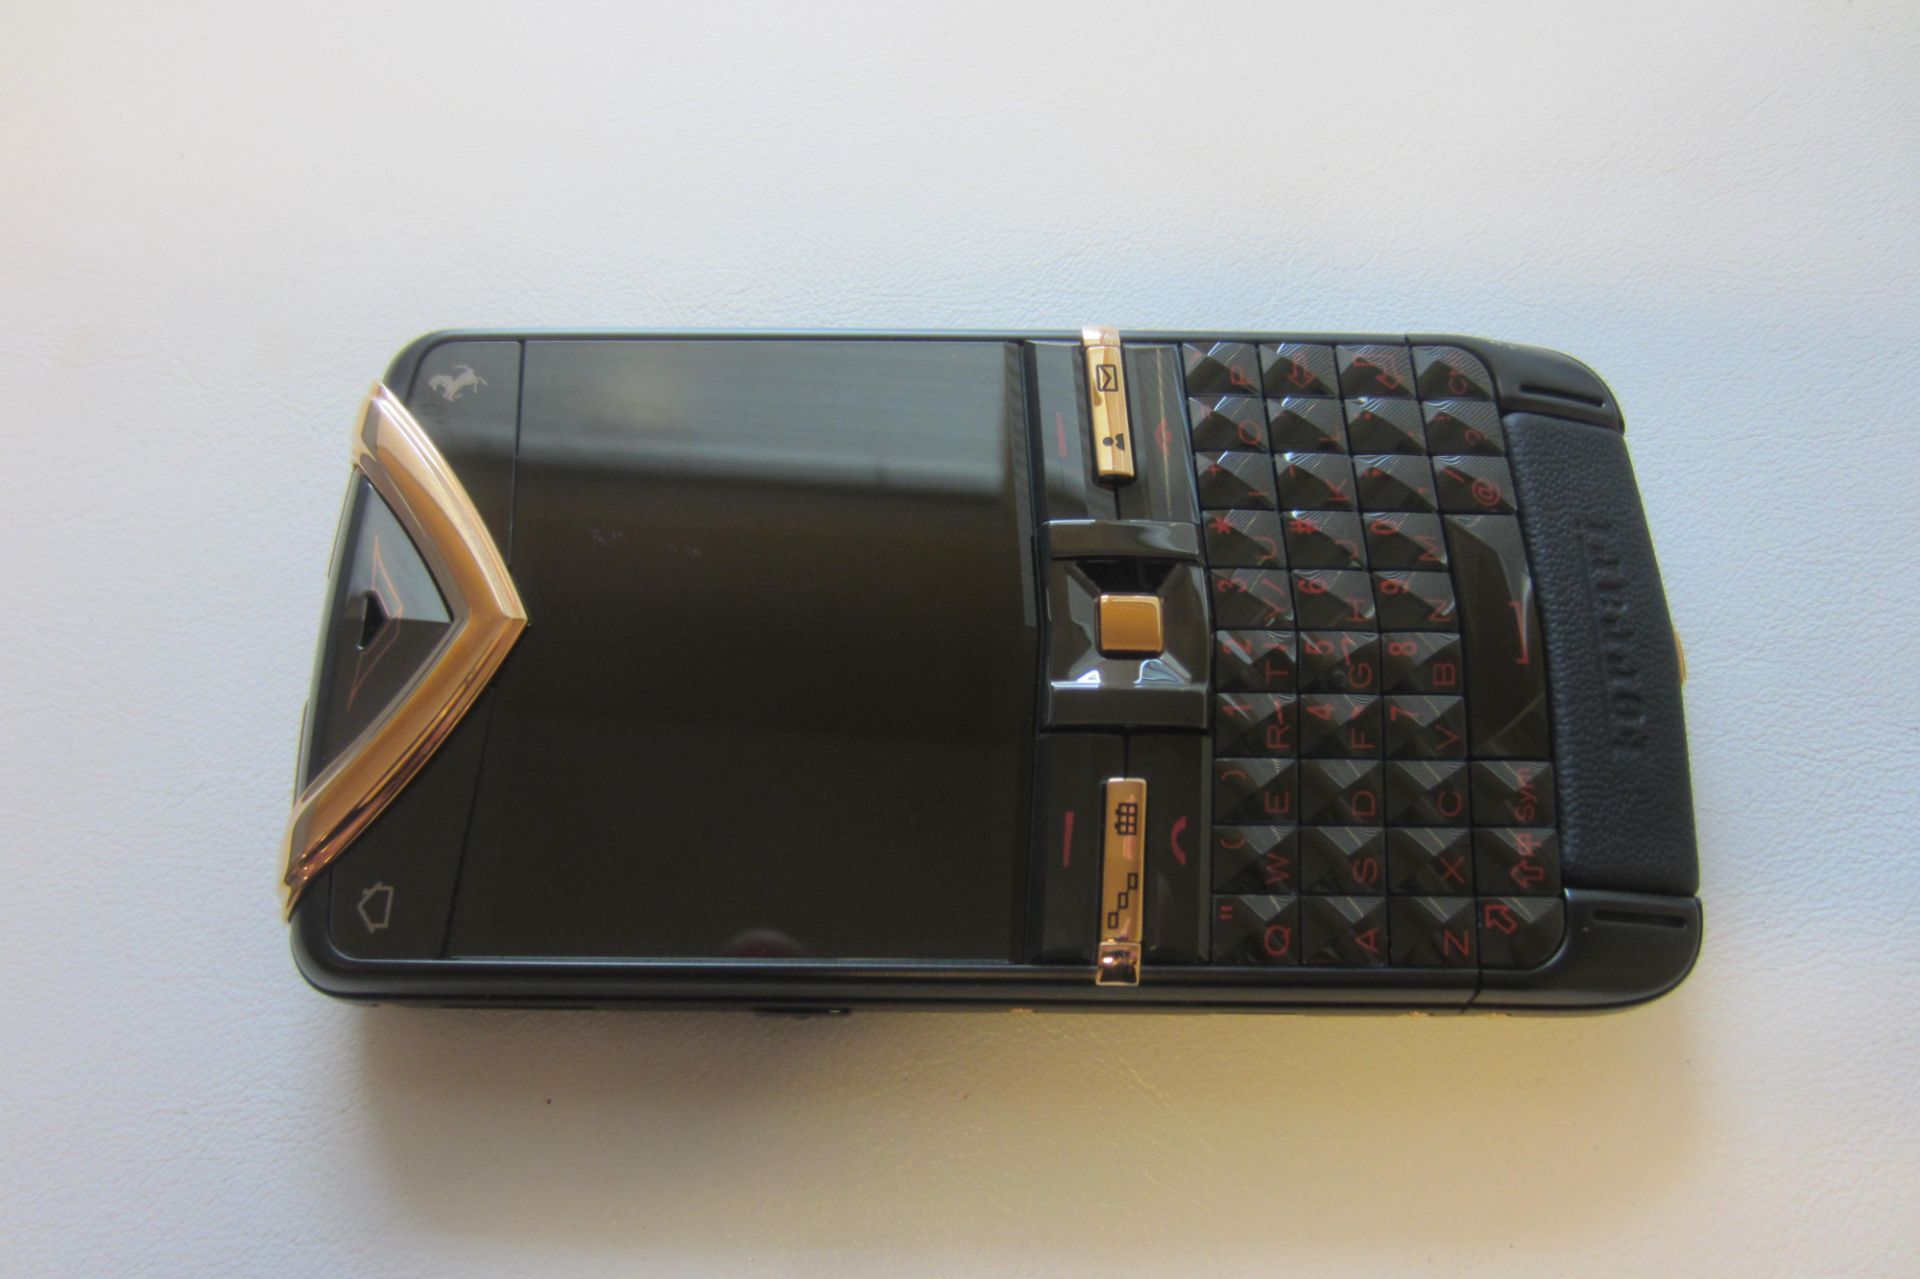 Re-Offered Due to Default by Buyer: Archive Collection of 23 Vertu Constellation Quest Phones - Bild 6 aus 13